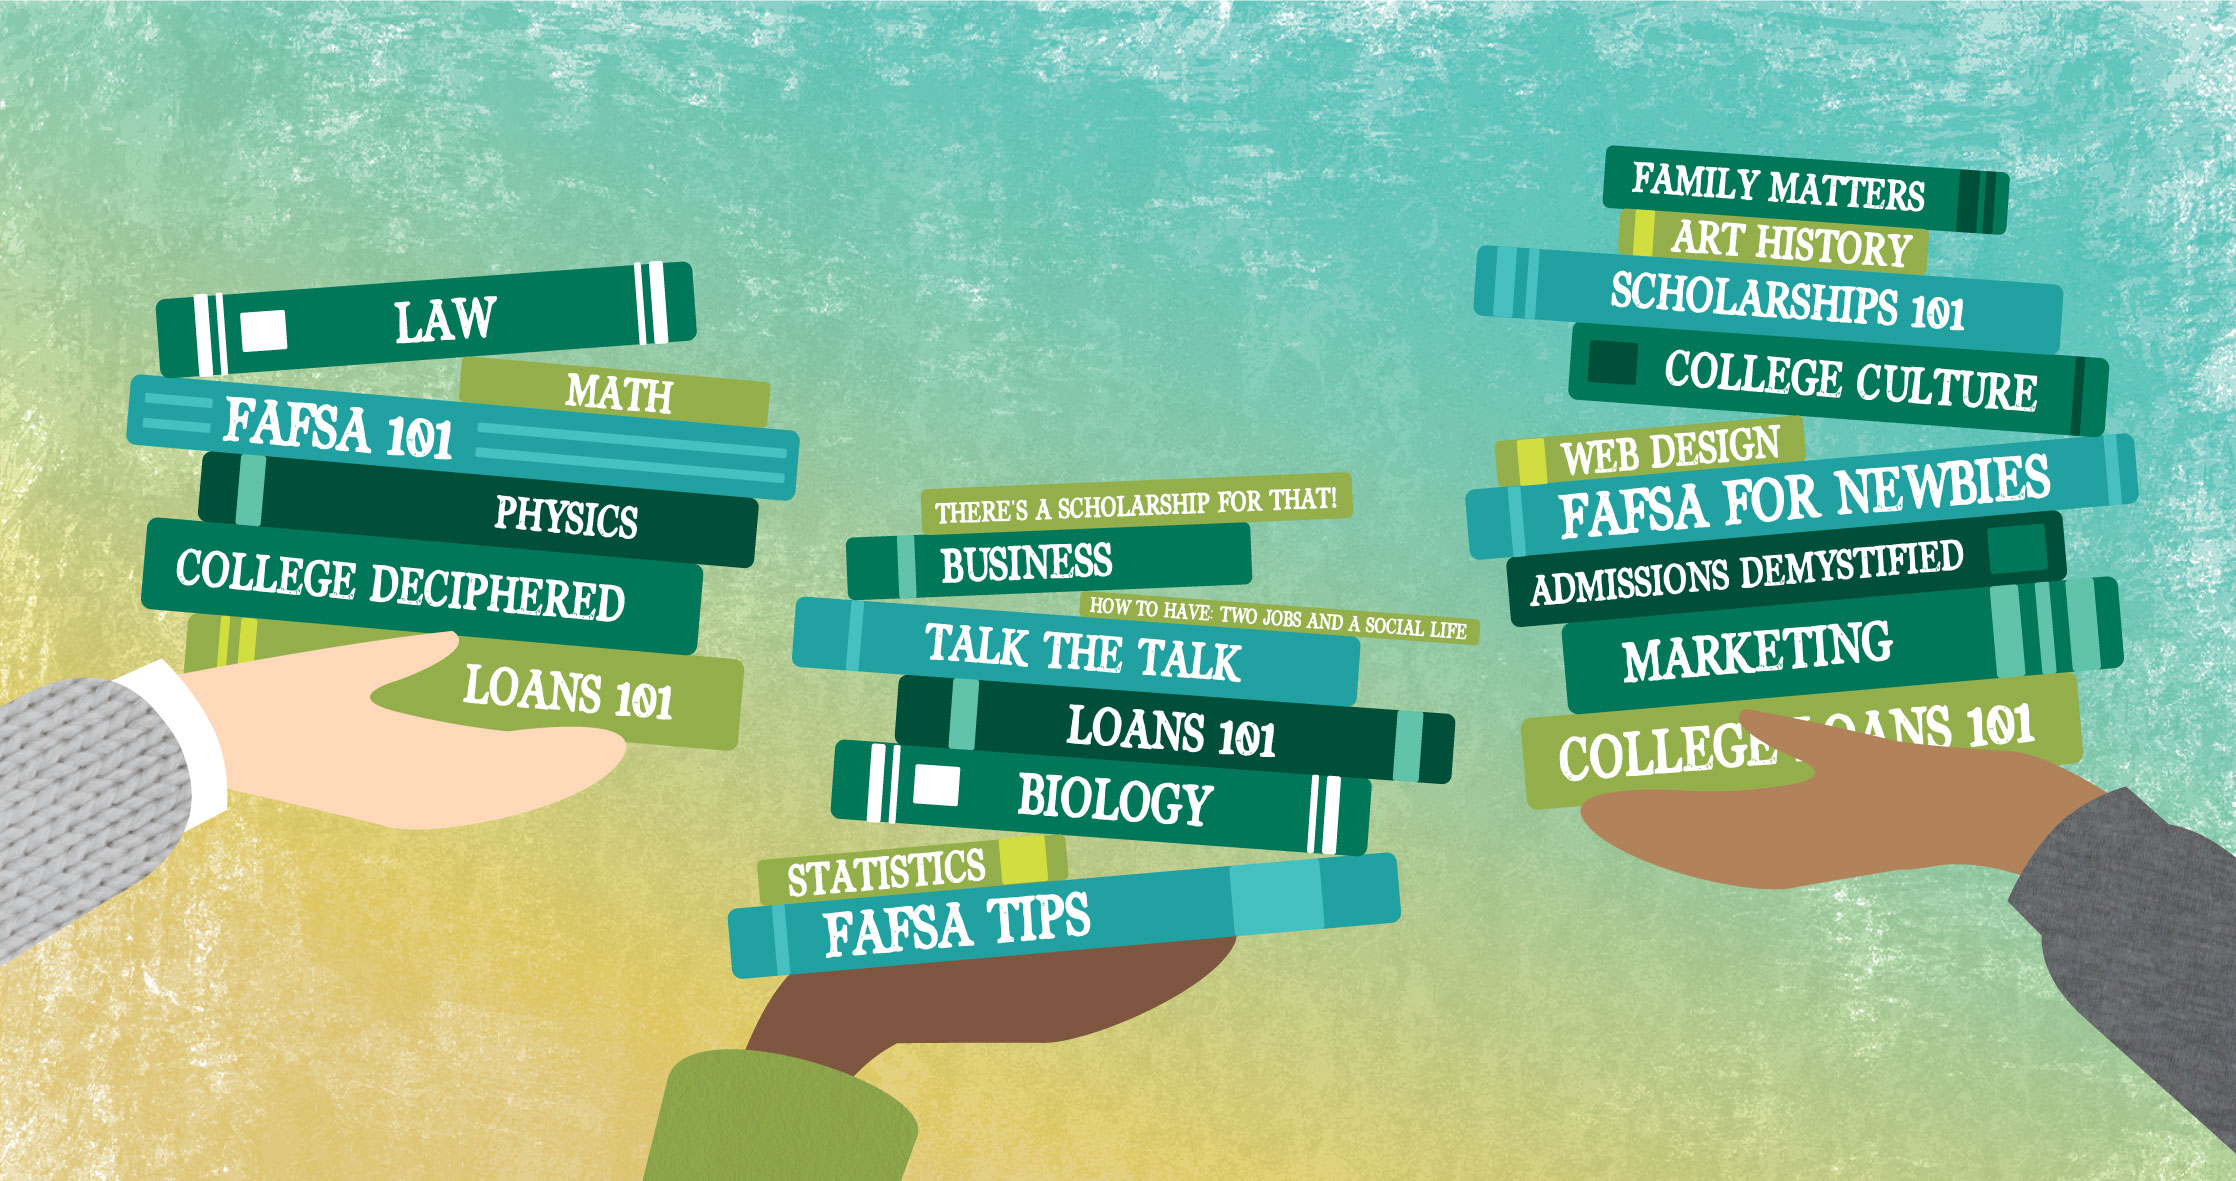 Illustration with hands holding up stacks of books. Book titles include traditional course topics like Math and Biology, but also topics that would be most beneficial for first generation college students like FAFSA Tips, College Loans 101, and College Deciphered.   